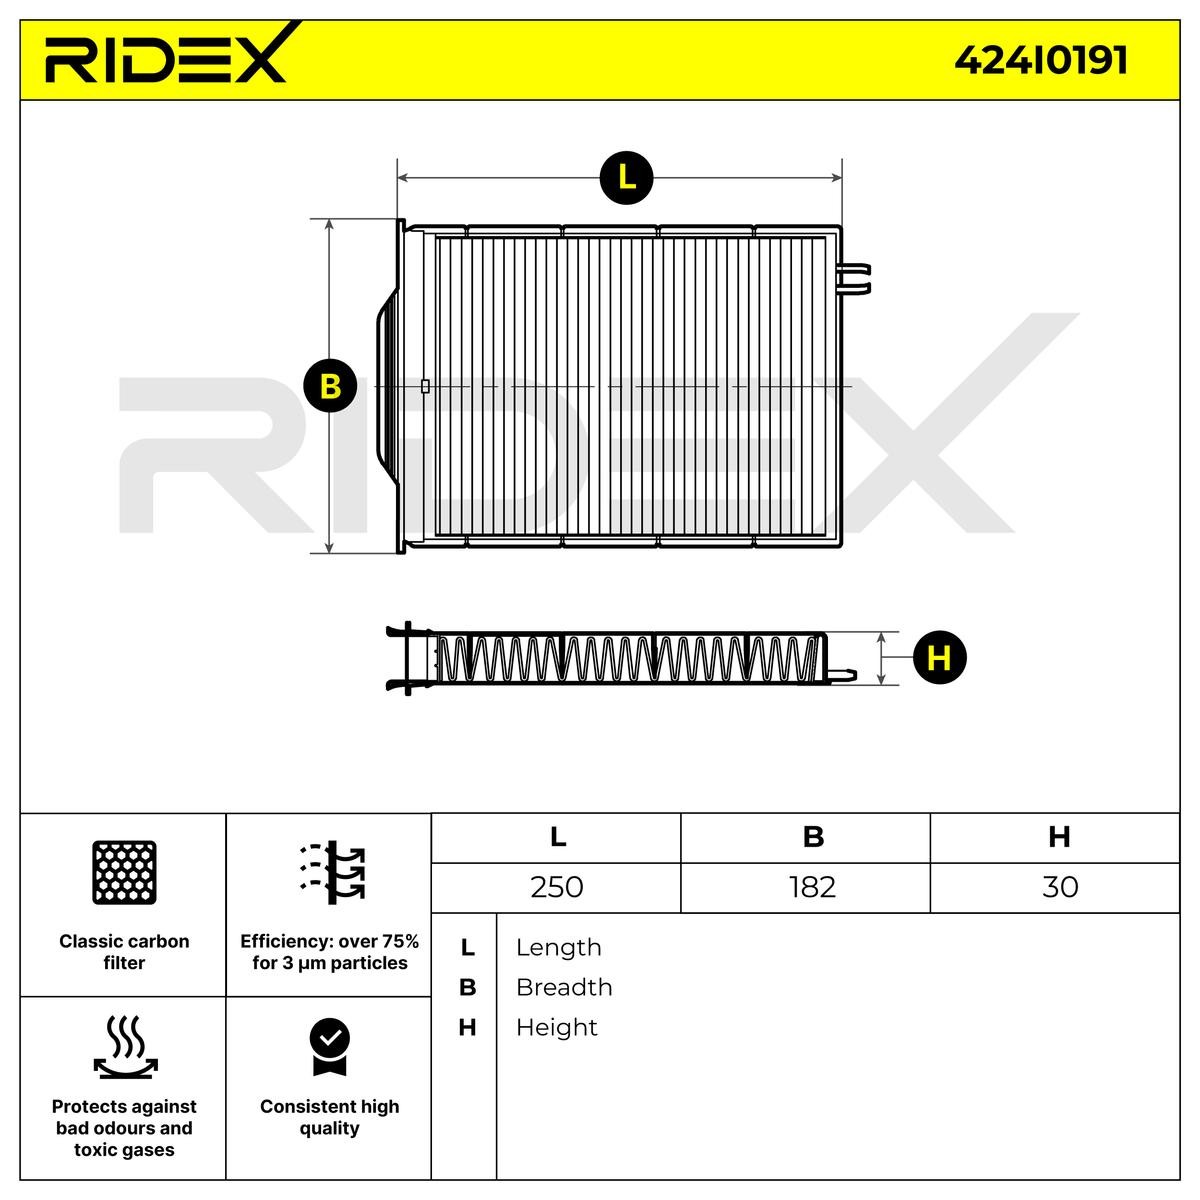 RIDEX Air conditioning filter 424I0191 for RENAULT MEGANE